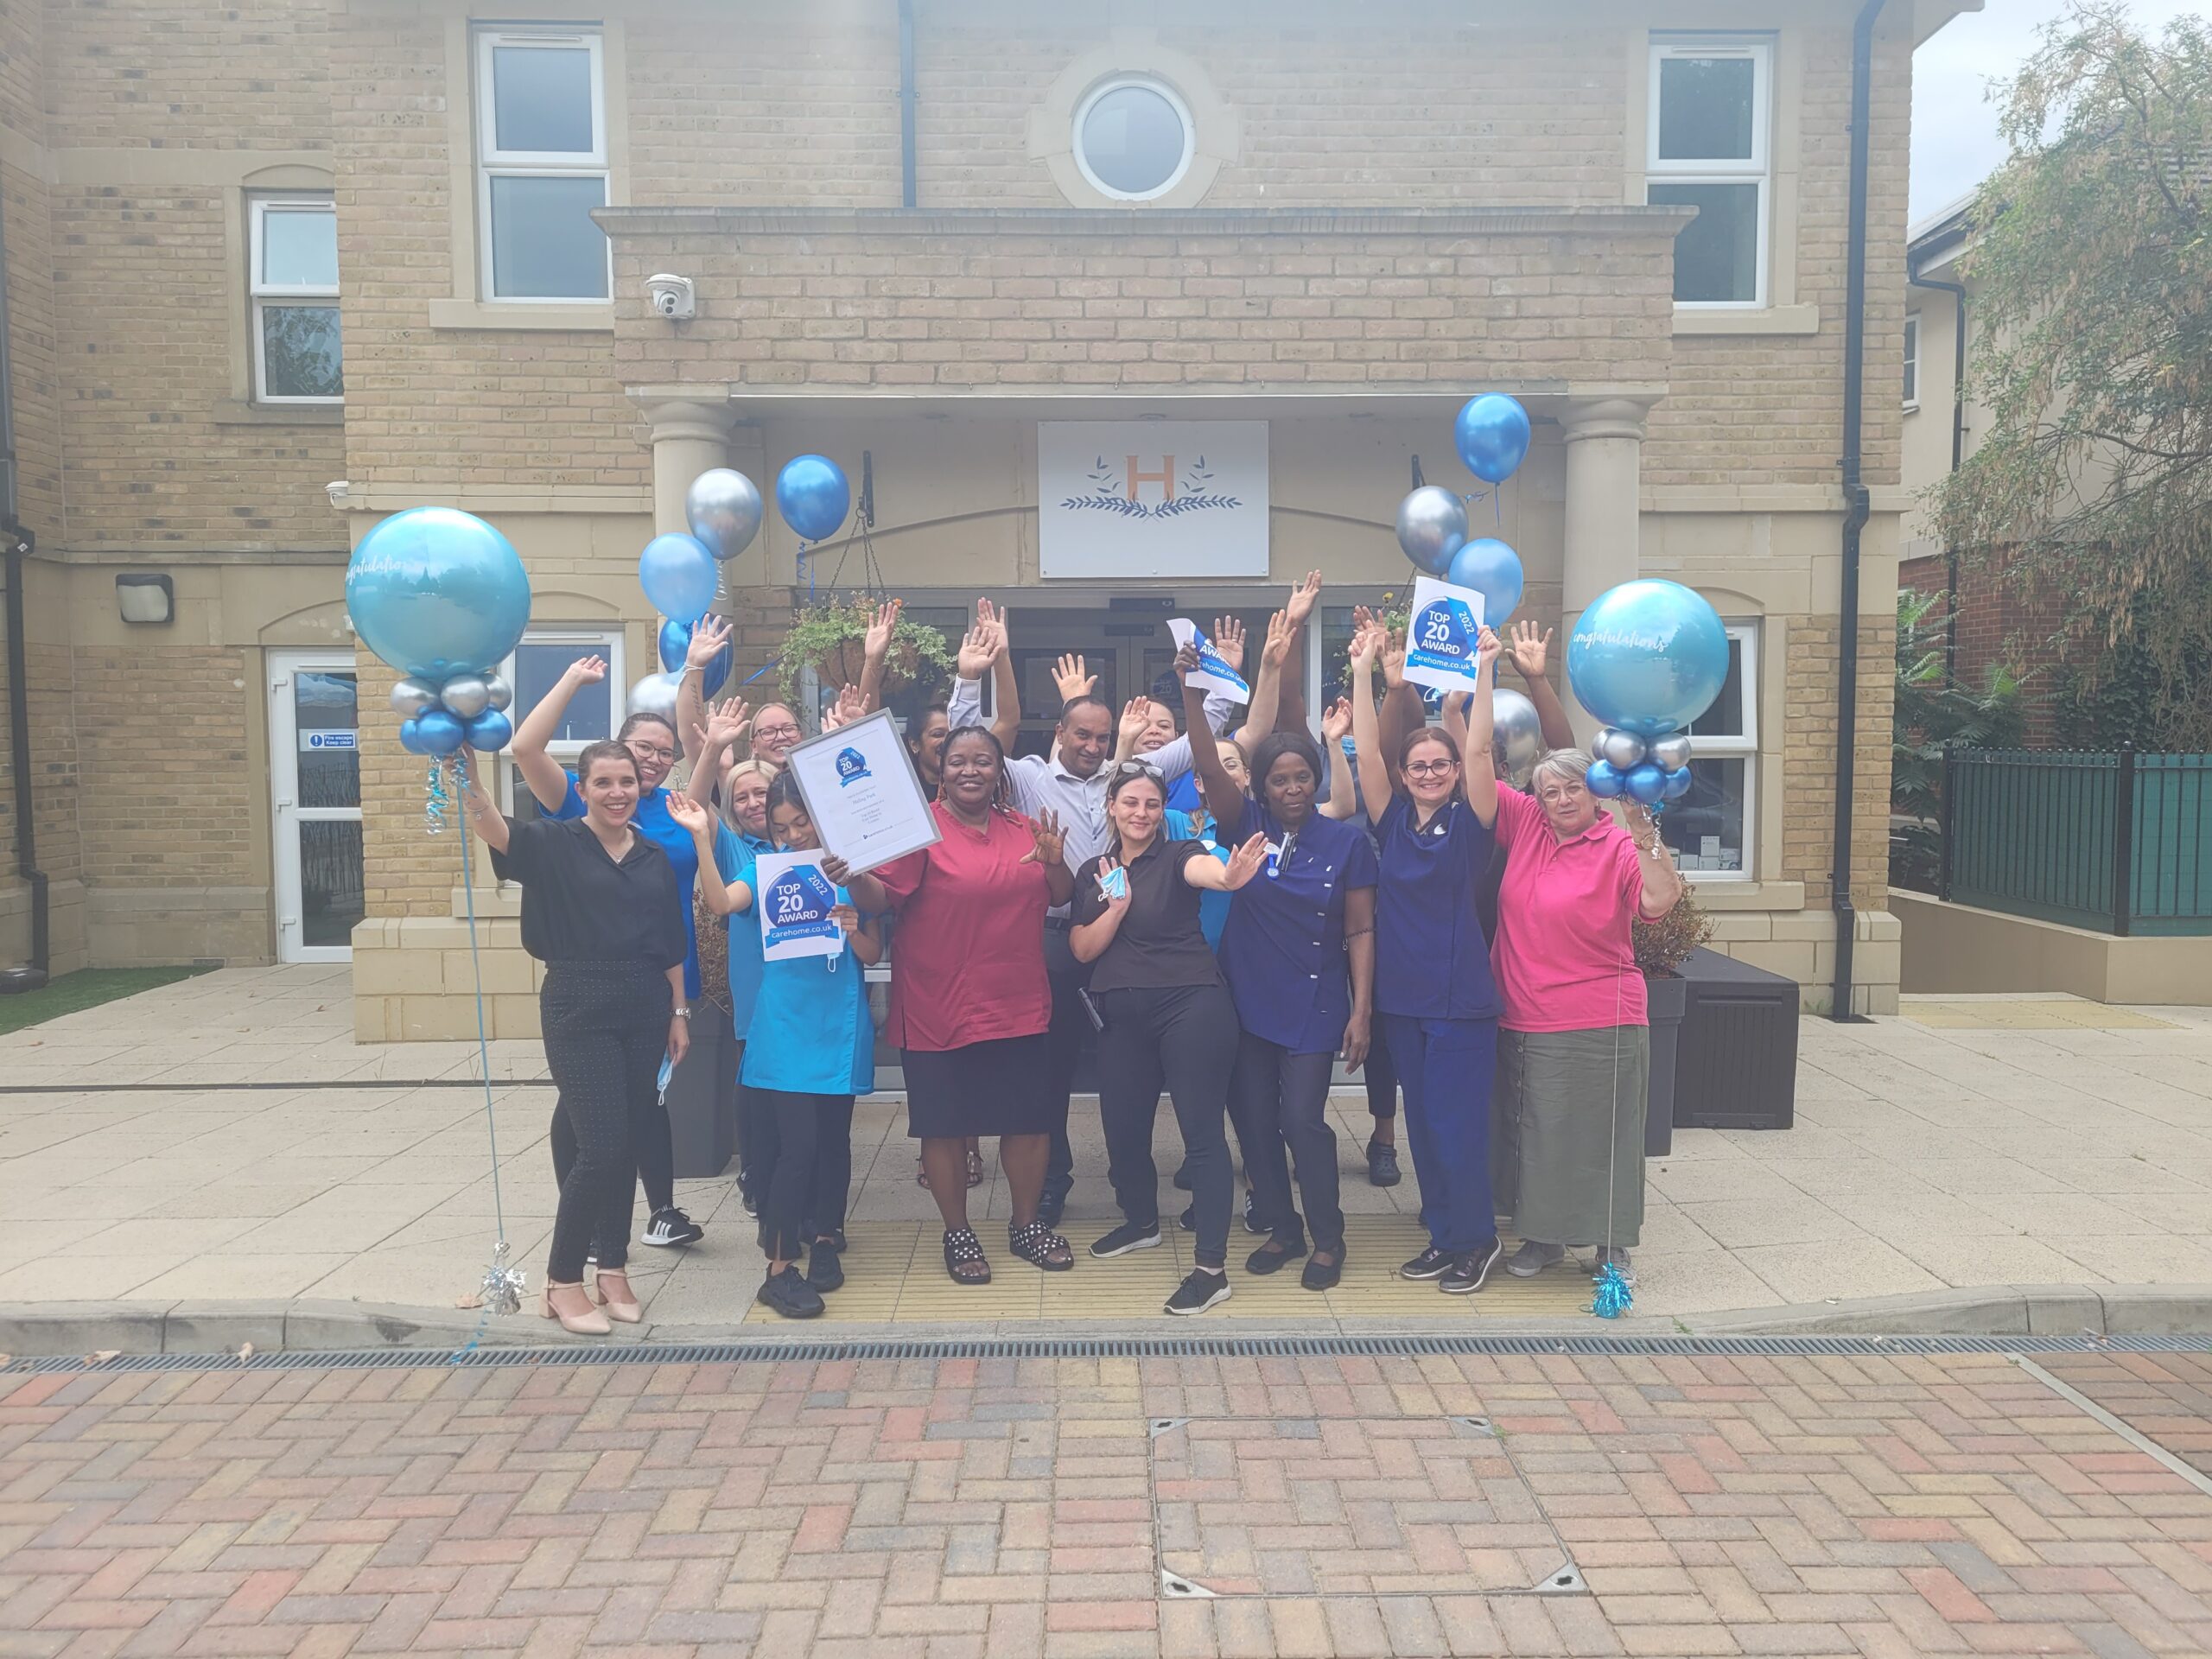 Our Team Thrilled With Top 20 Care Home Award